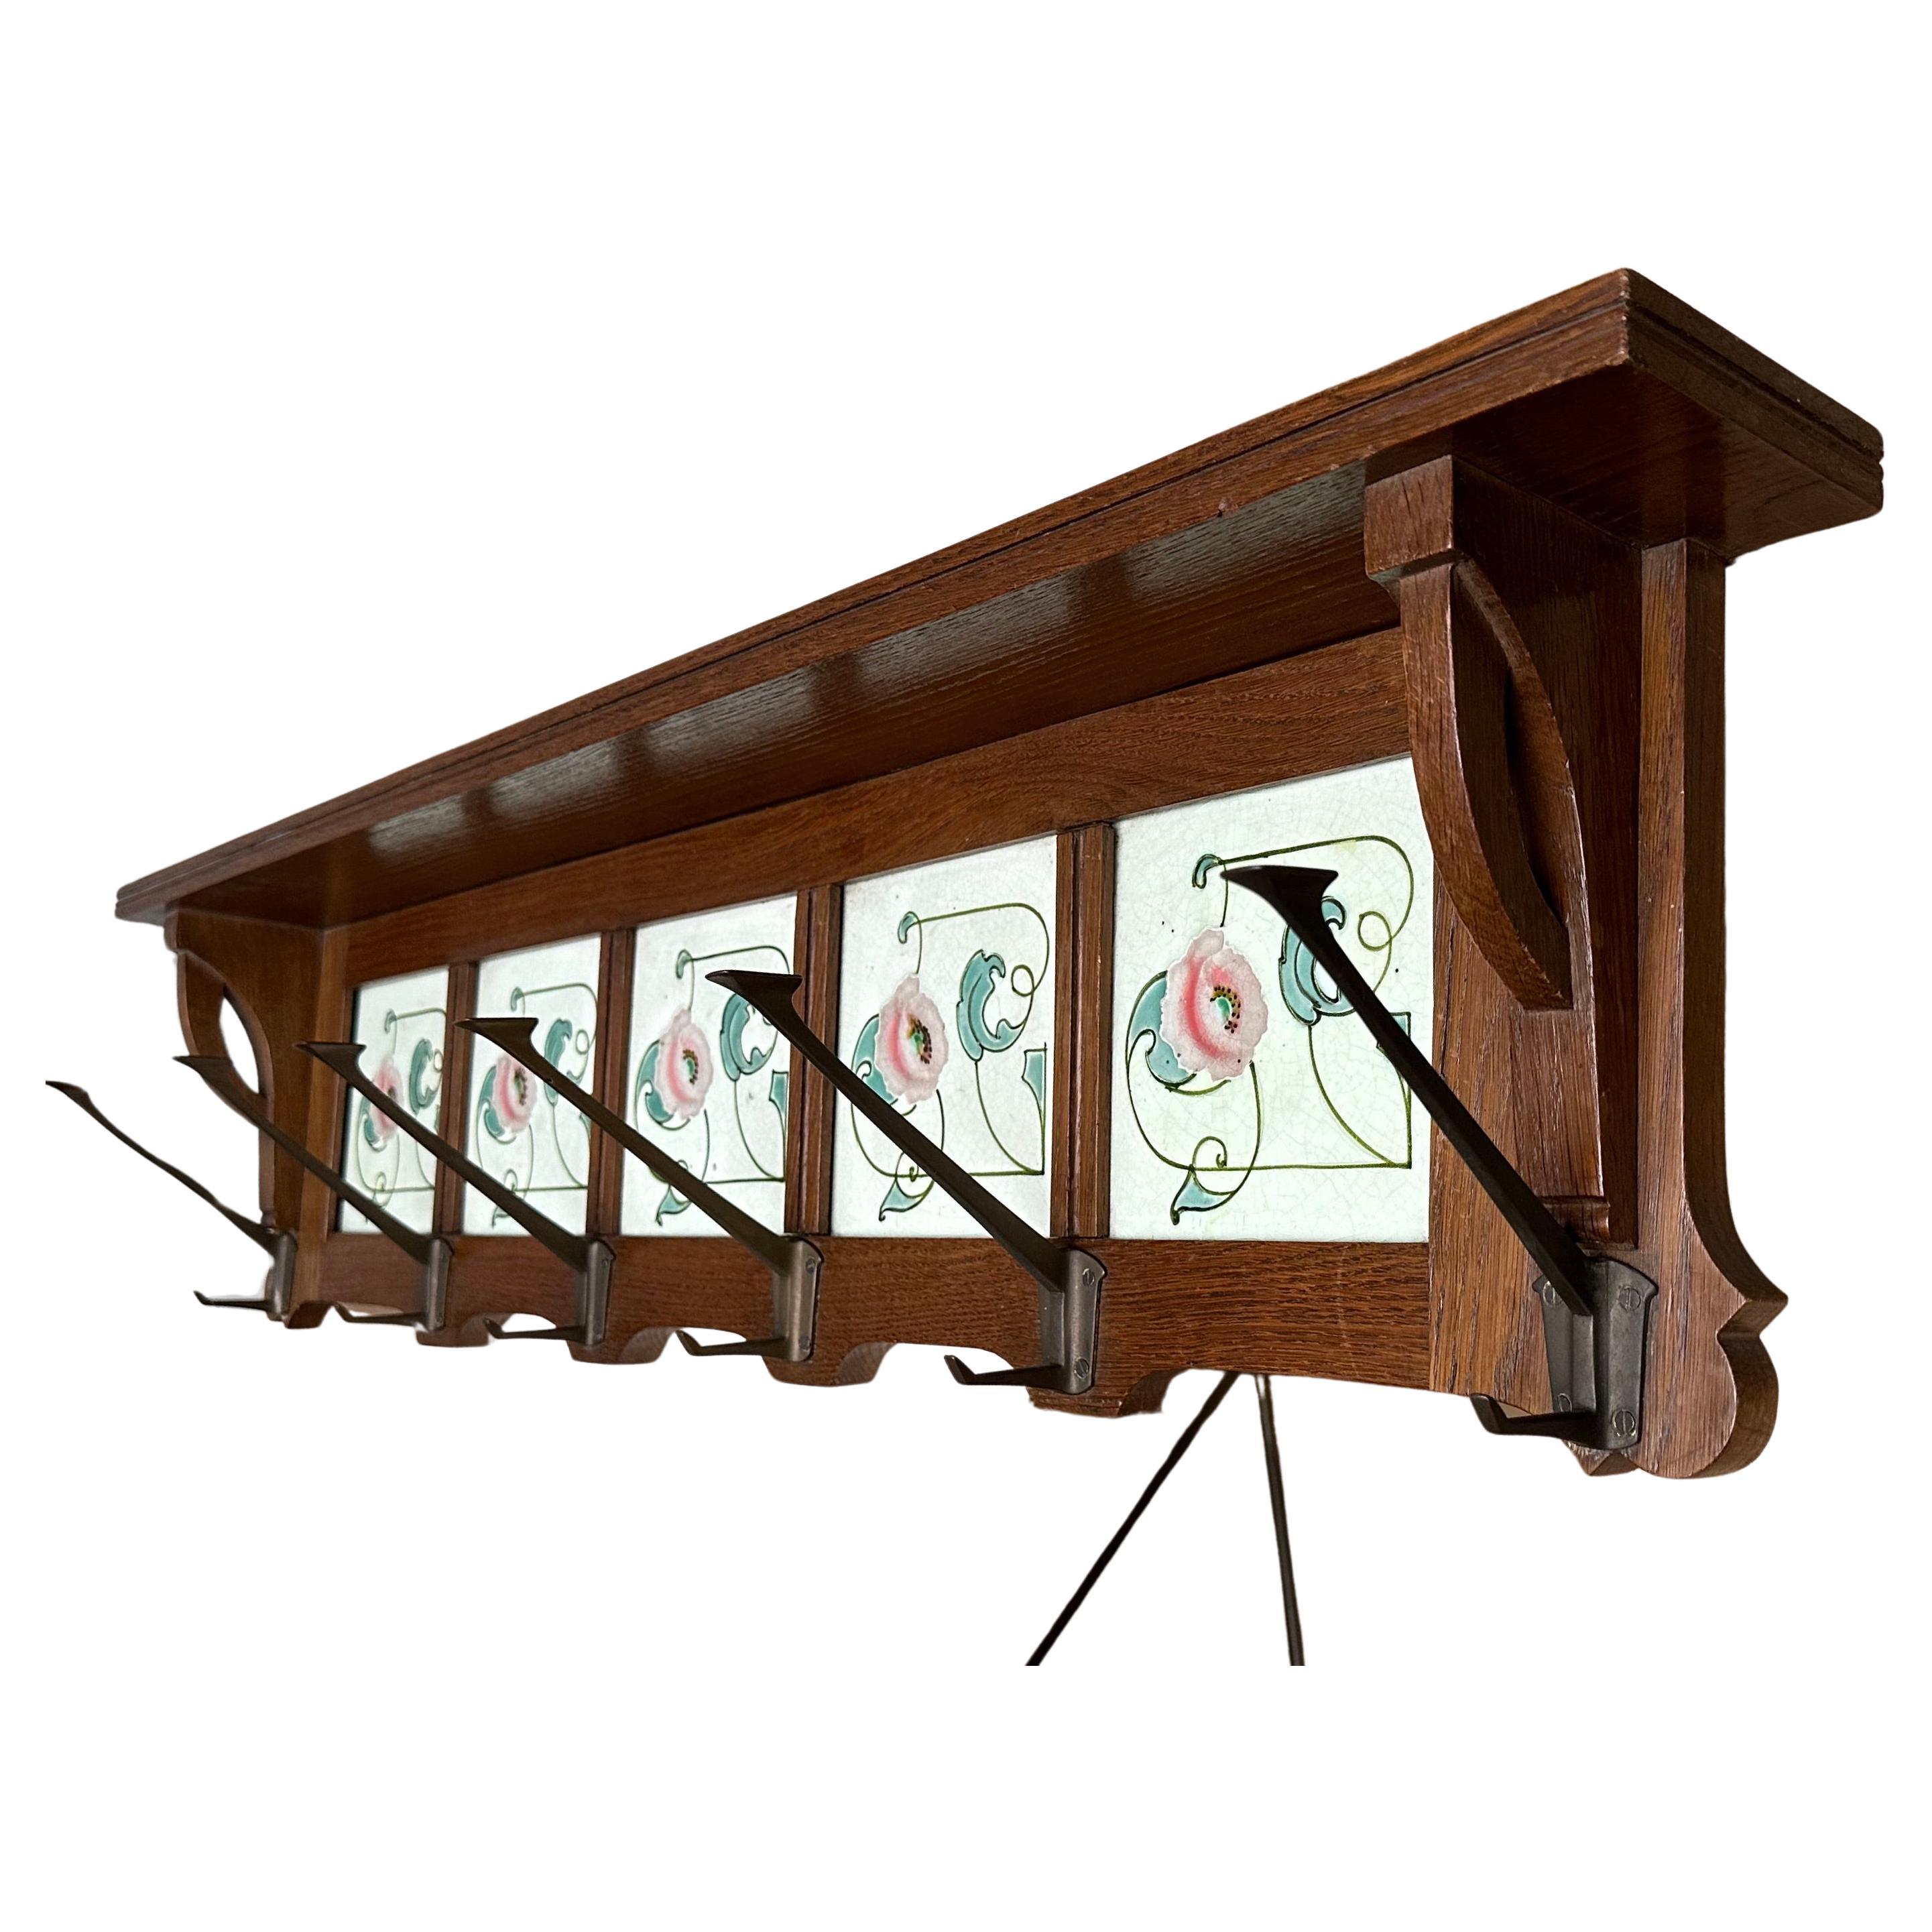 Stunning design and good condition, hand crafted oakwood wall coat-rack with unique tiles.

This rare and highly stylish Art Nouveau / Jugendstil coat rack is entirely original and in very good condition. Its large size and practical design makes it